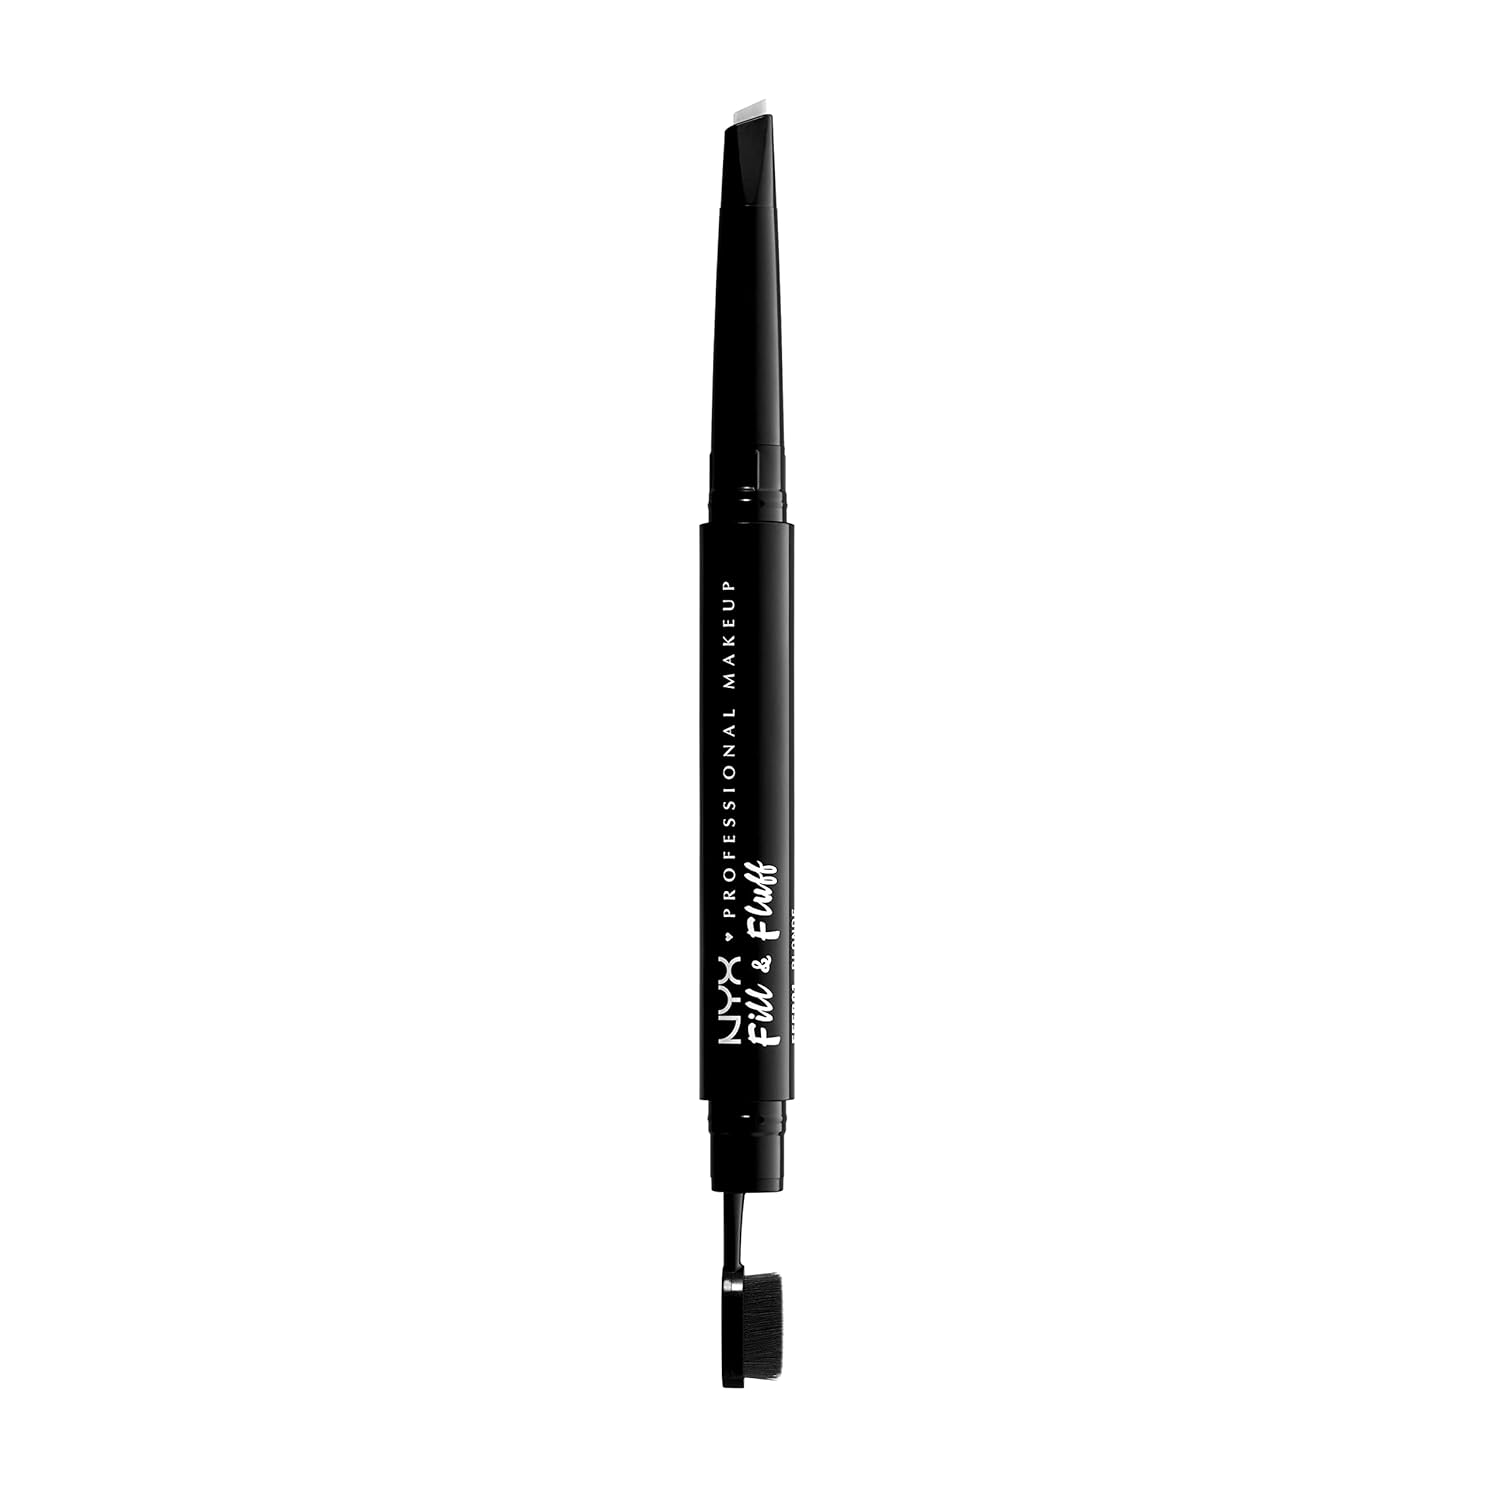 NYX PROFESSIONAL MAKEUP Fill & uff Eyebrow Pomade Pencil, Clear